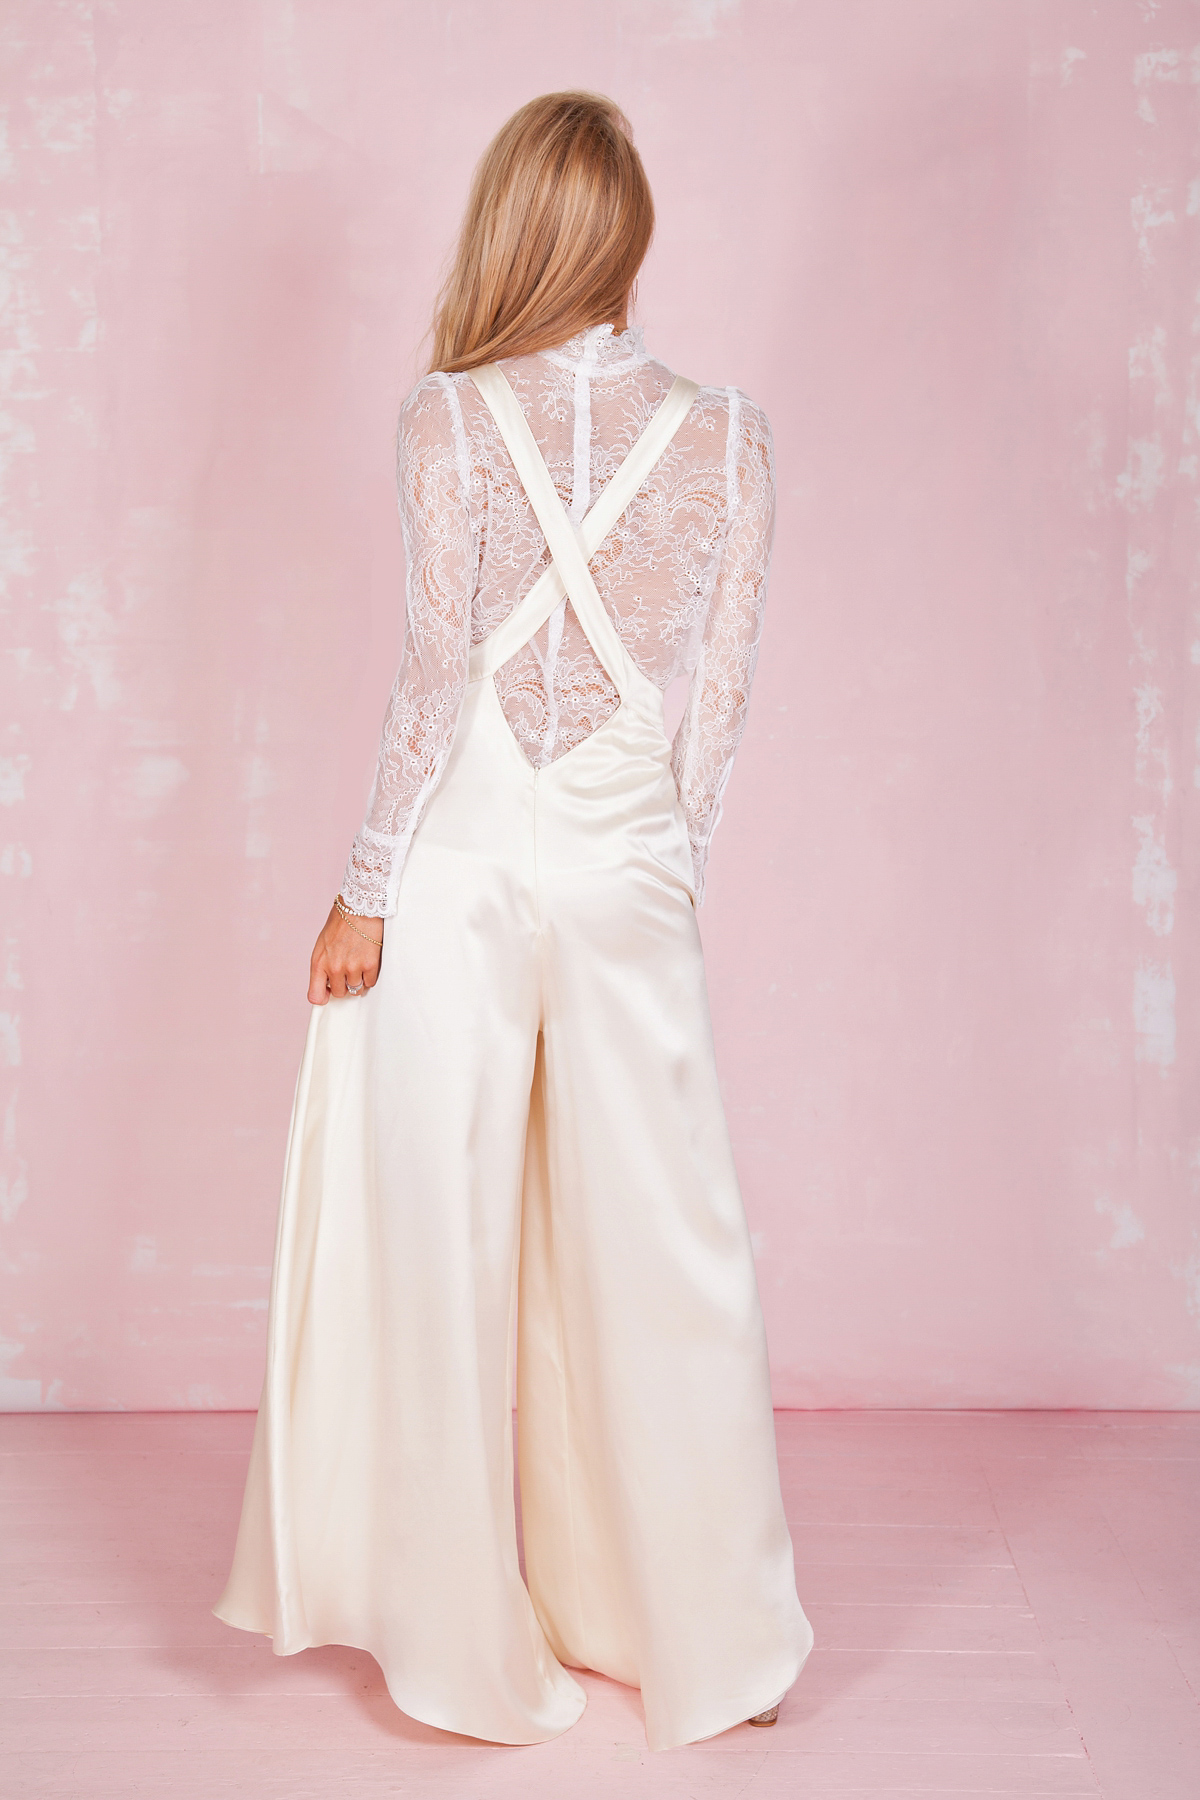 Belle and Bunty's 1970's New York disco scene inspired bridal fashion collection, 'Young Hearts, Run Free'.